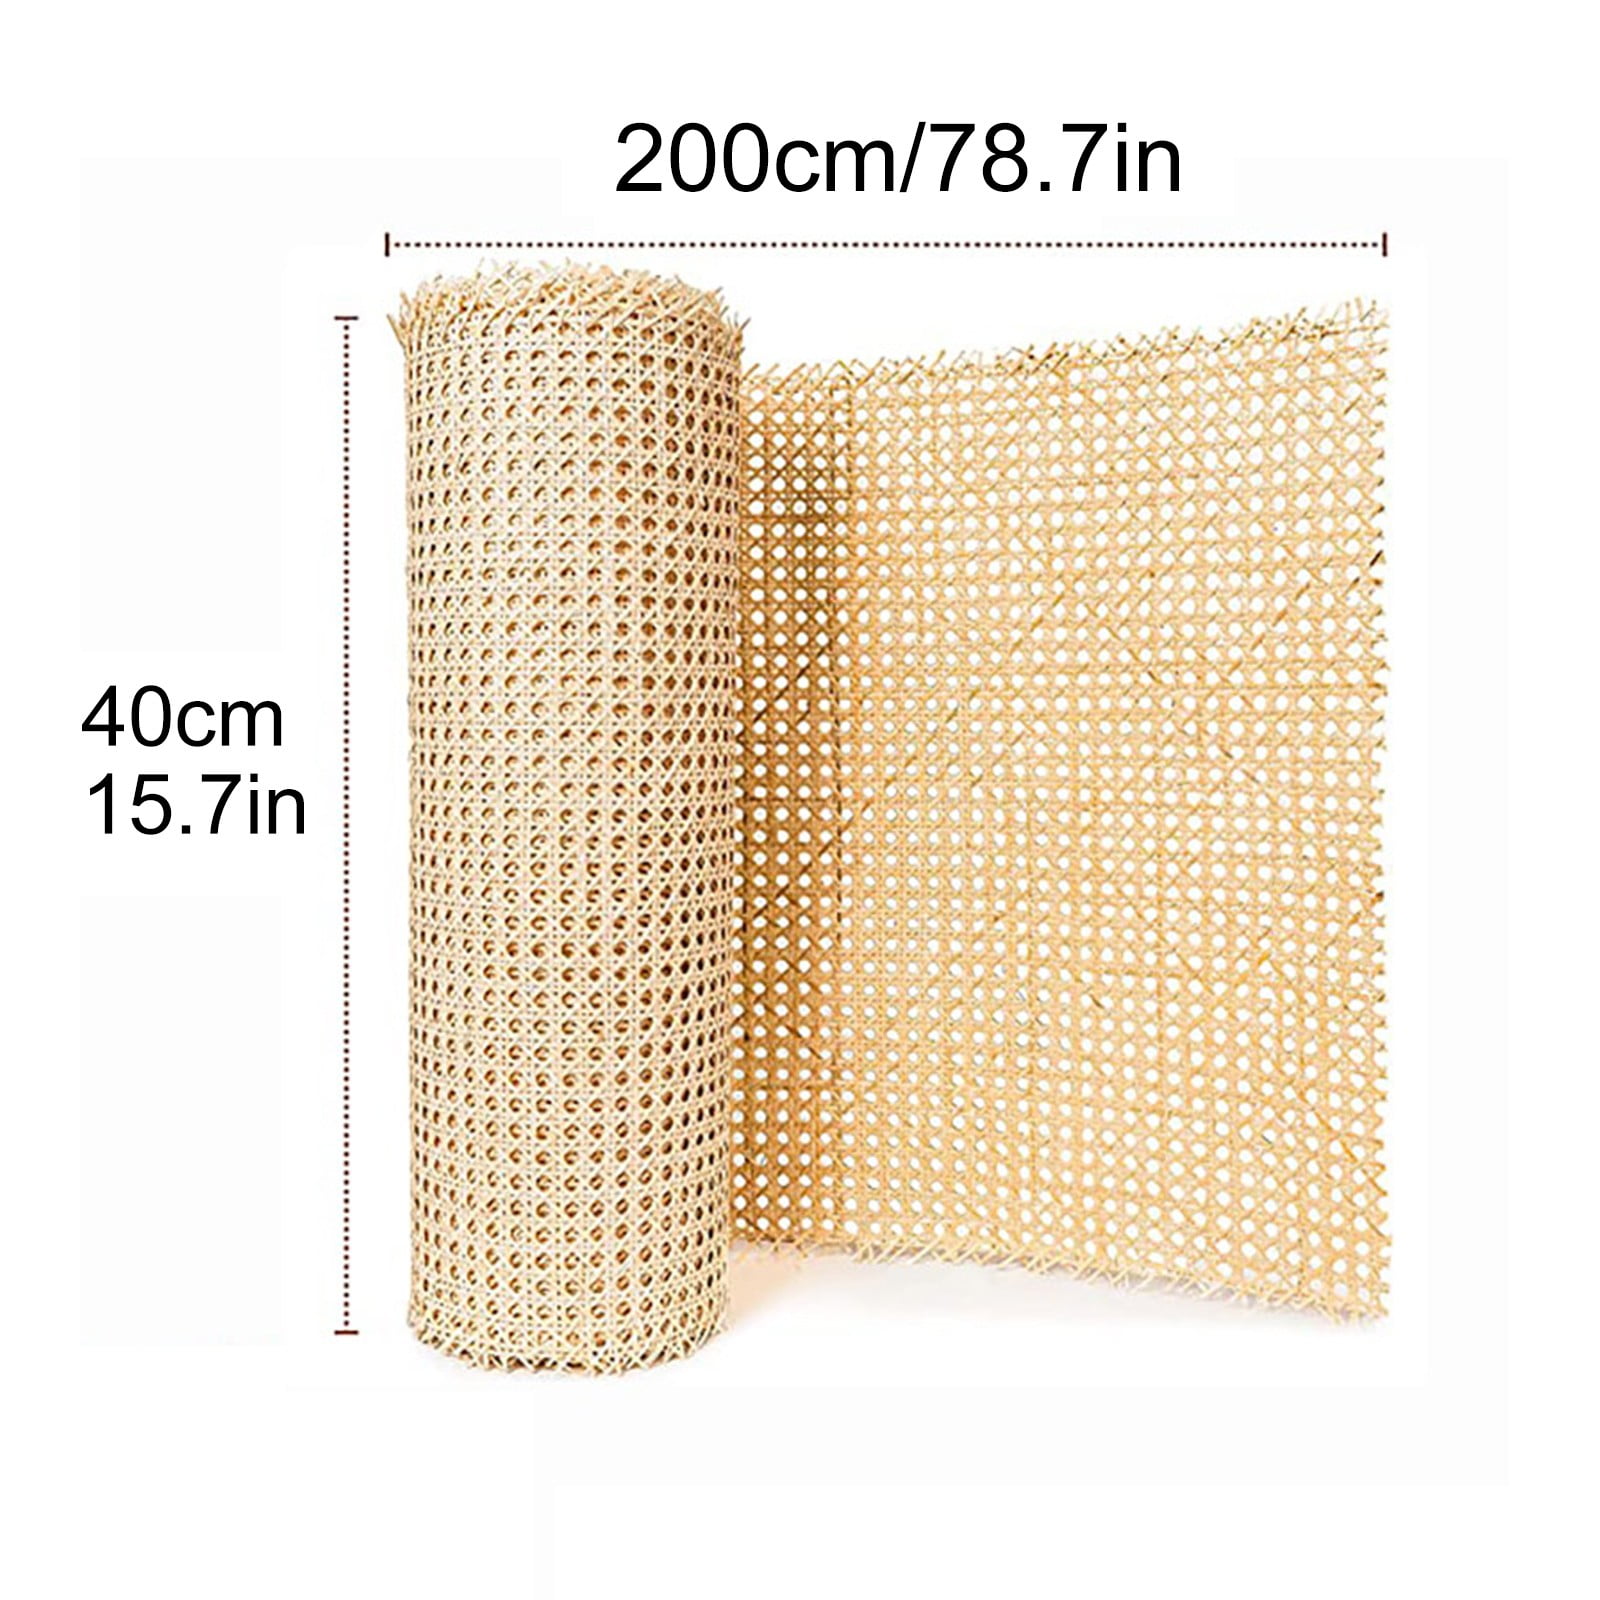 Cane Webbing Rattan Roll Caning Material Fabric，Rattan Sheets Furniture  Repairing, Caning Projects Net Open Weave Wicker，Pre - Woven Open Mesh Cane